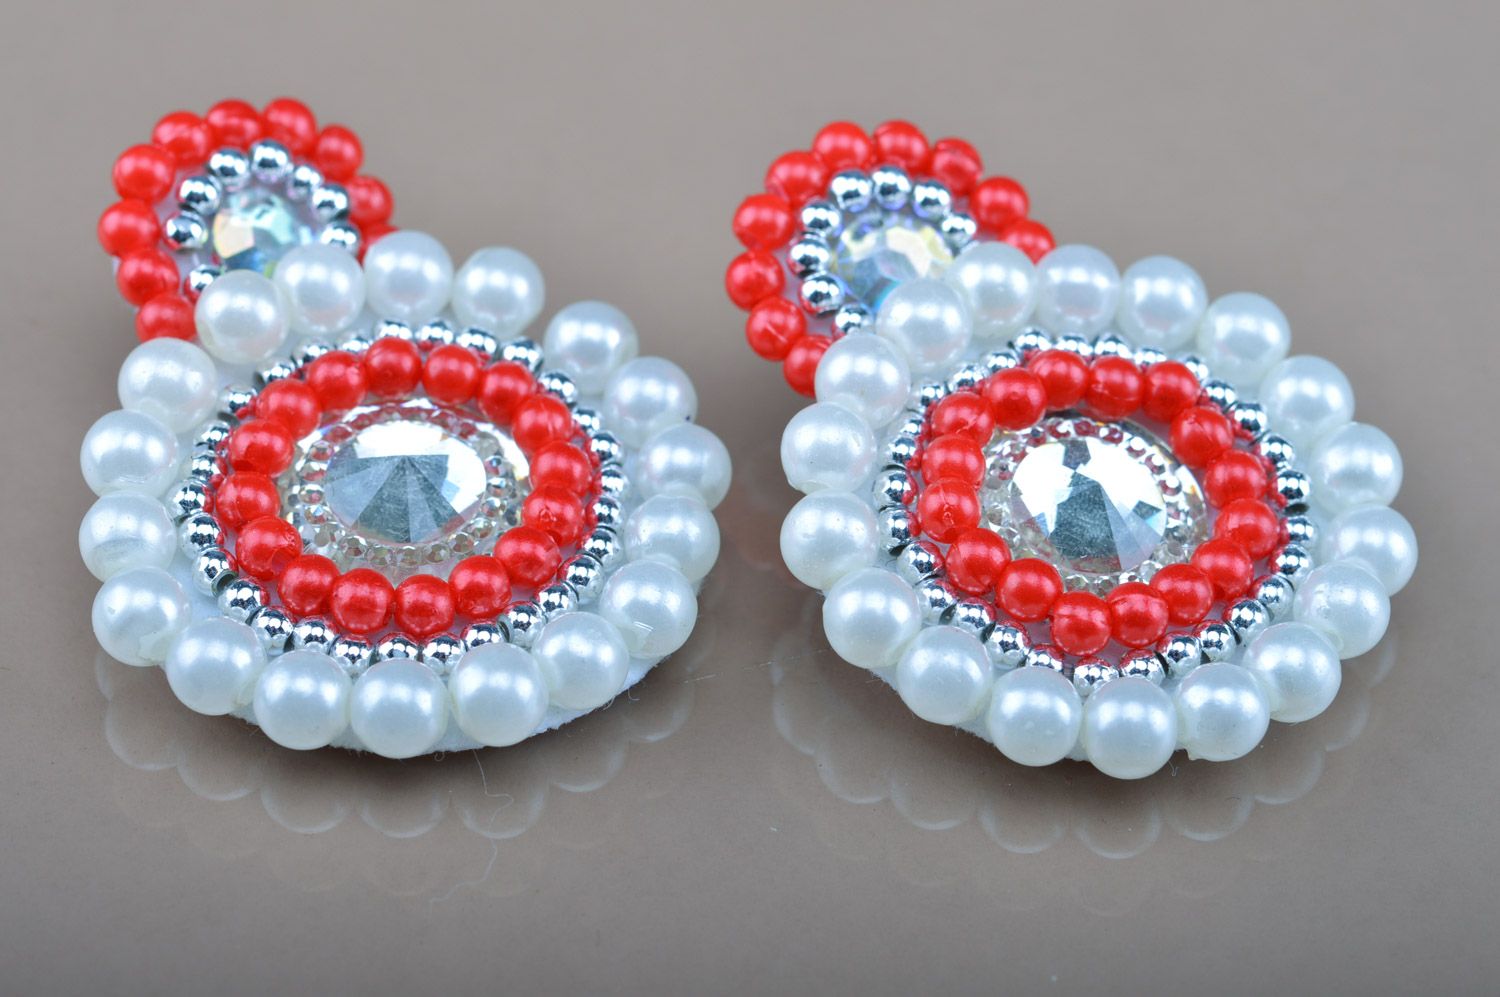 Festive handmade round stud earrings with beads in white and red colors photo 1